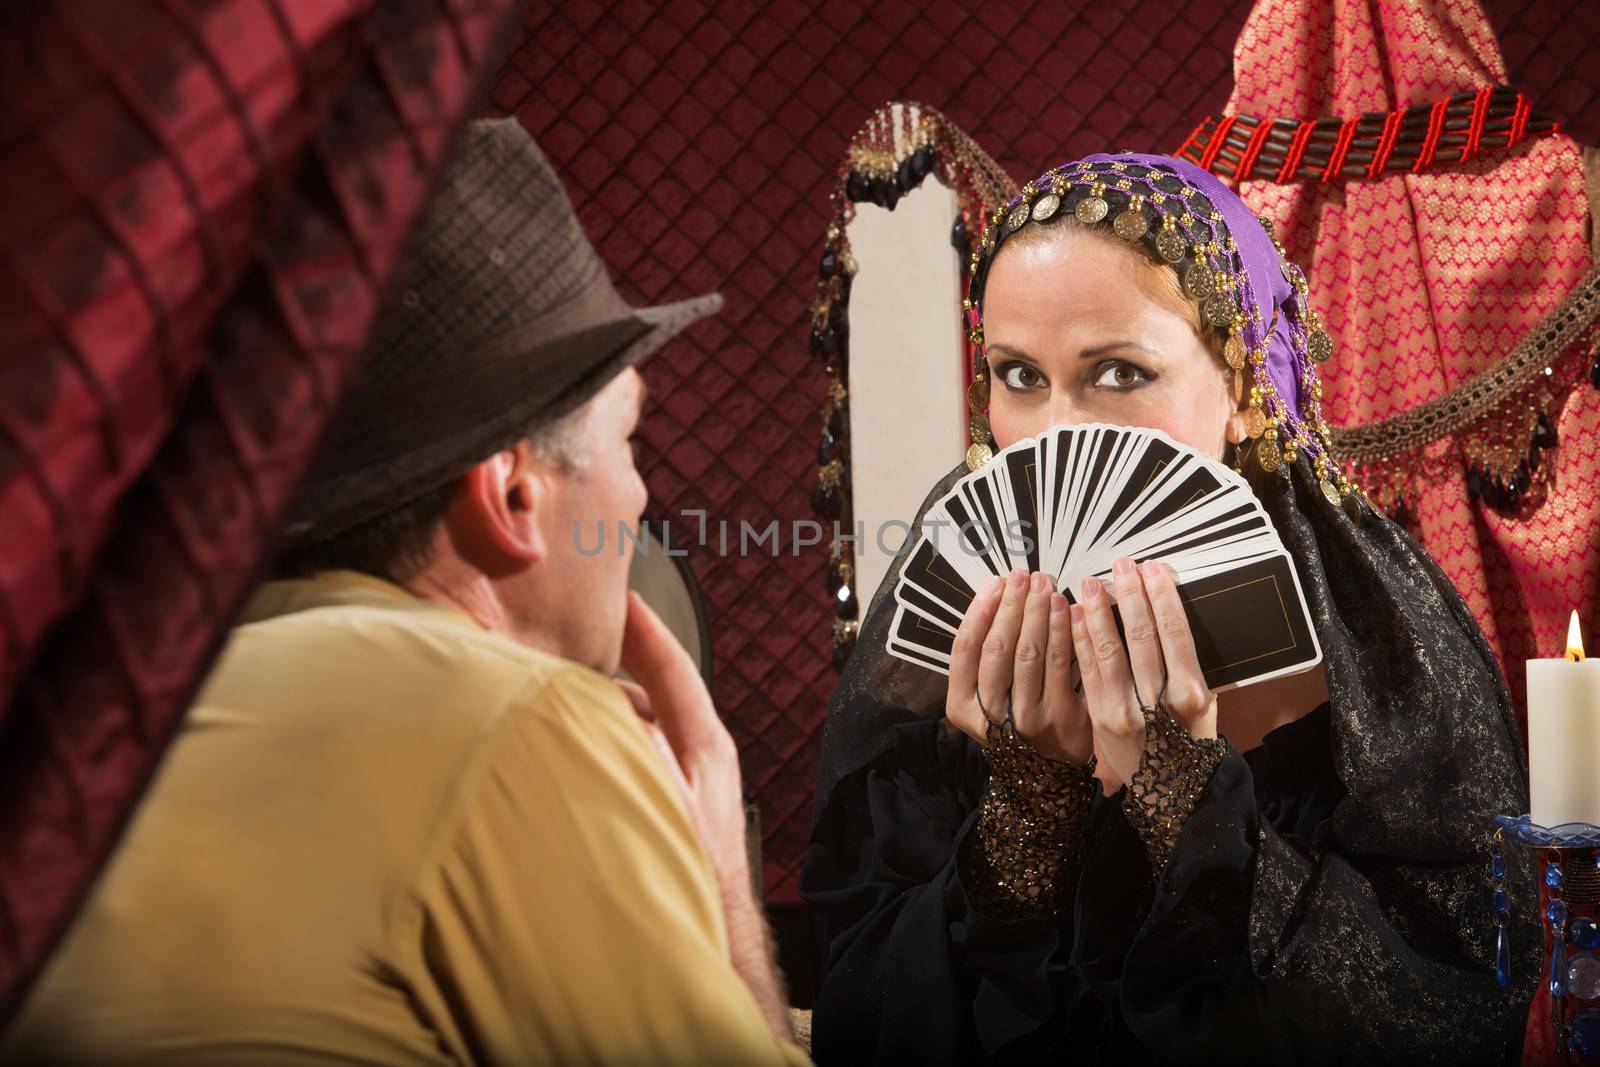 Attractive gypsy fortune partially covered by tarot cards